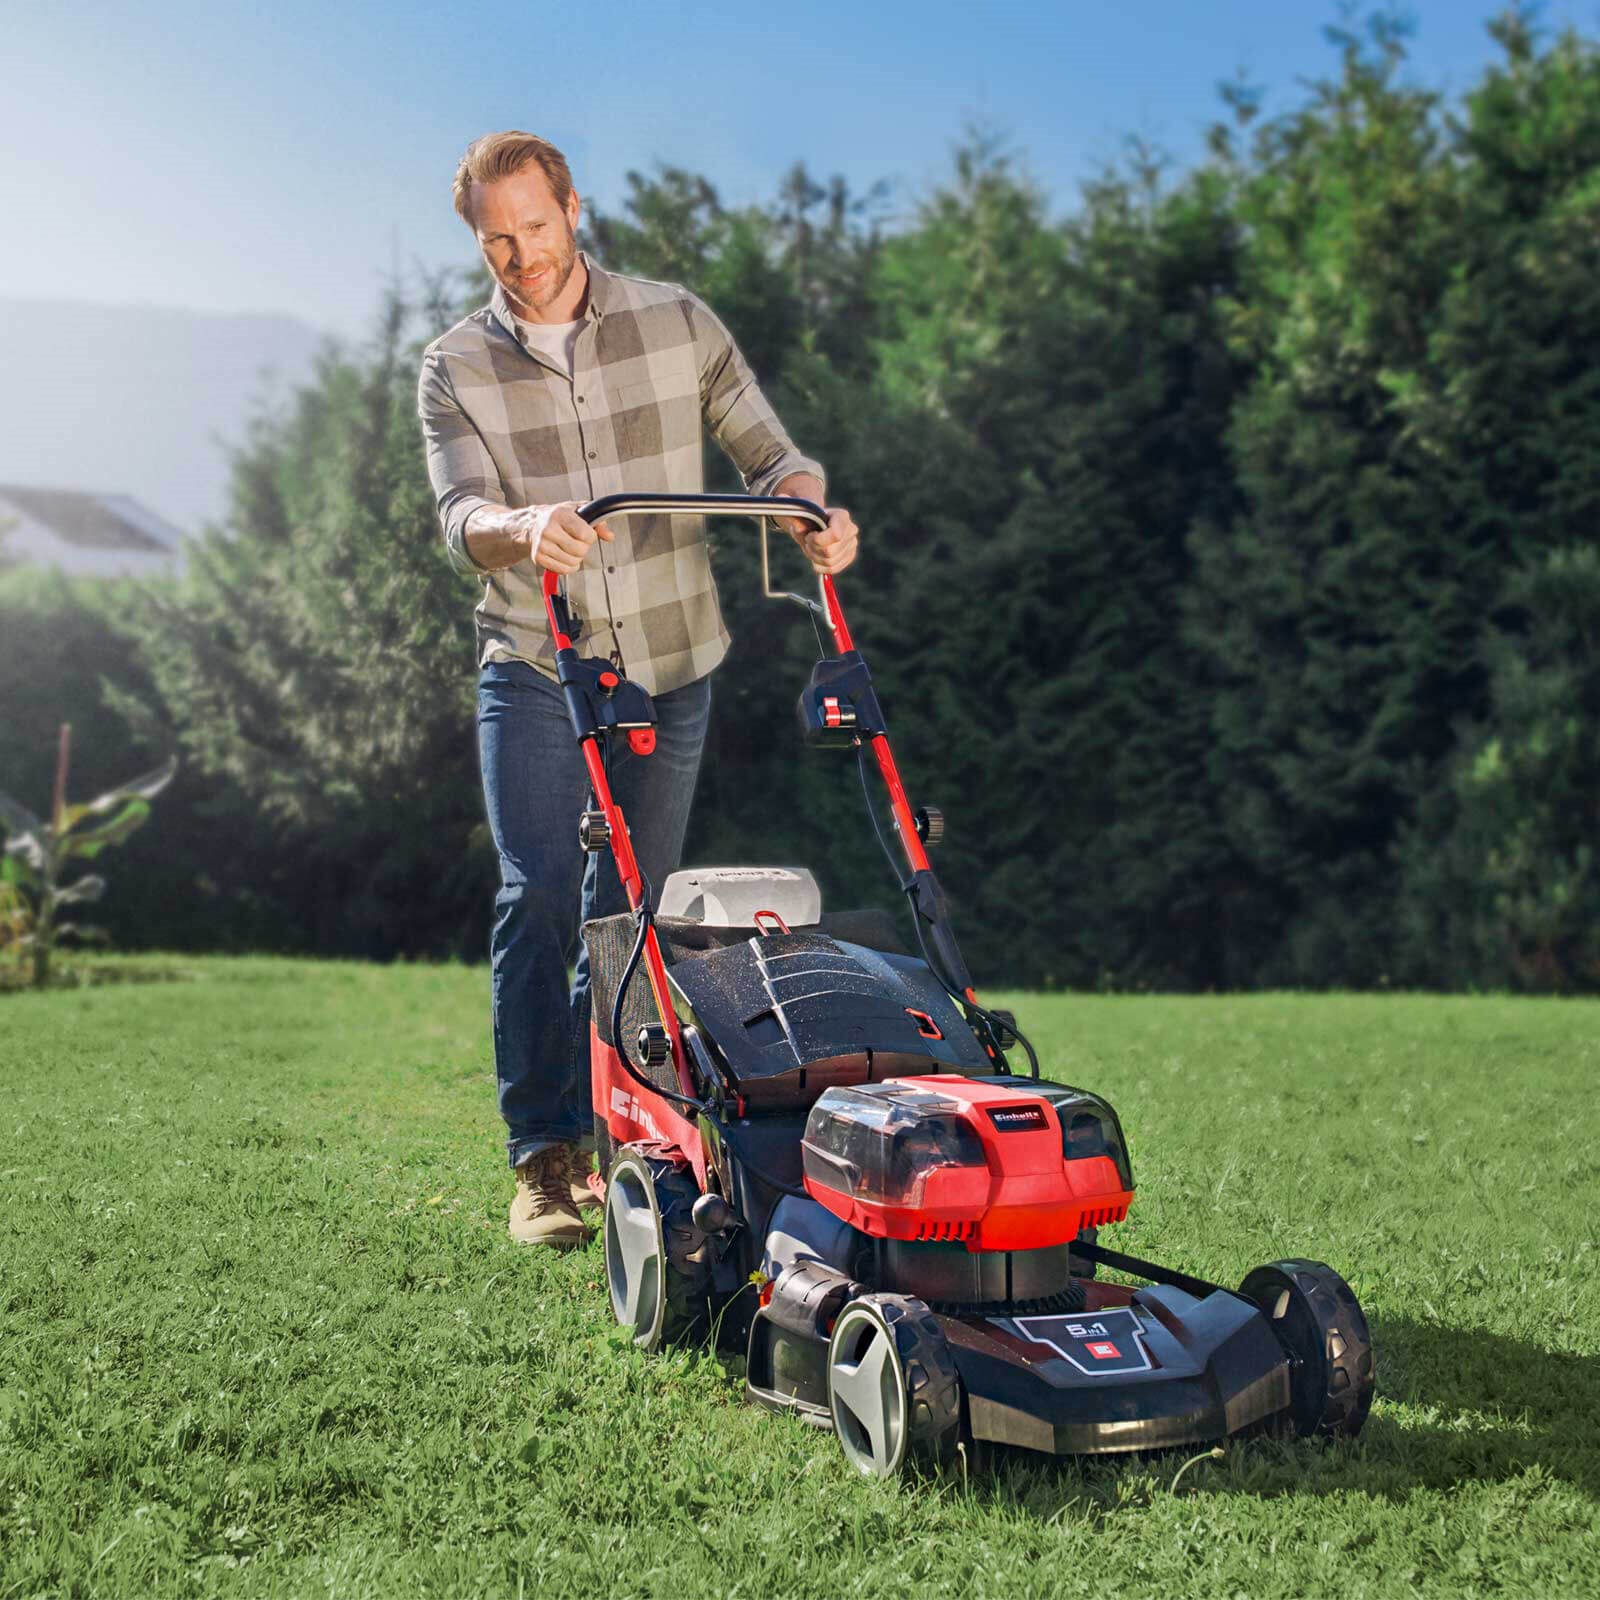 Mister Worker®  EINHELL GP-CM 36/47 S HW Li (4x4.0Ah) - 18V 4Ah cordless  lawnmower (with 4 batteries and 2 chargers)